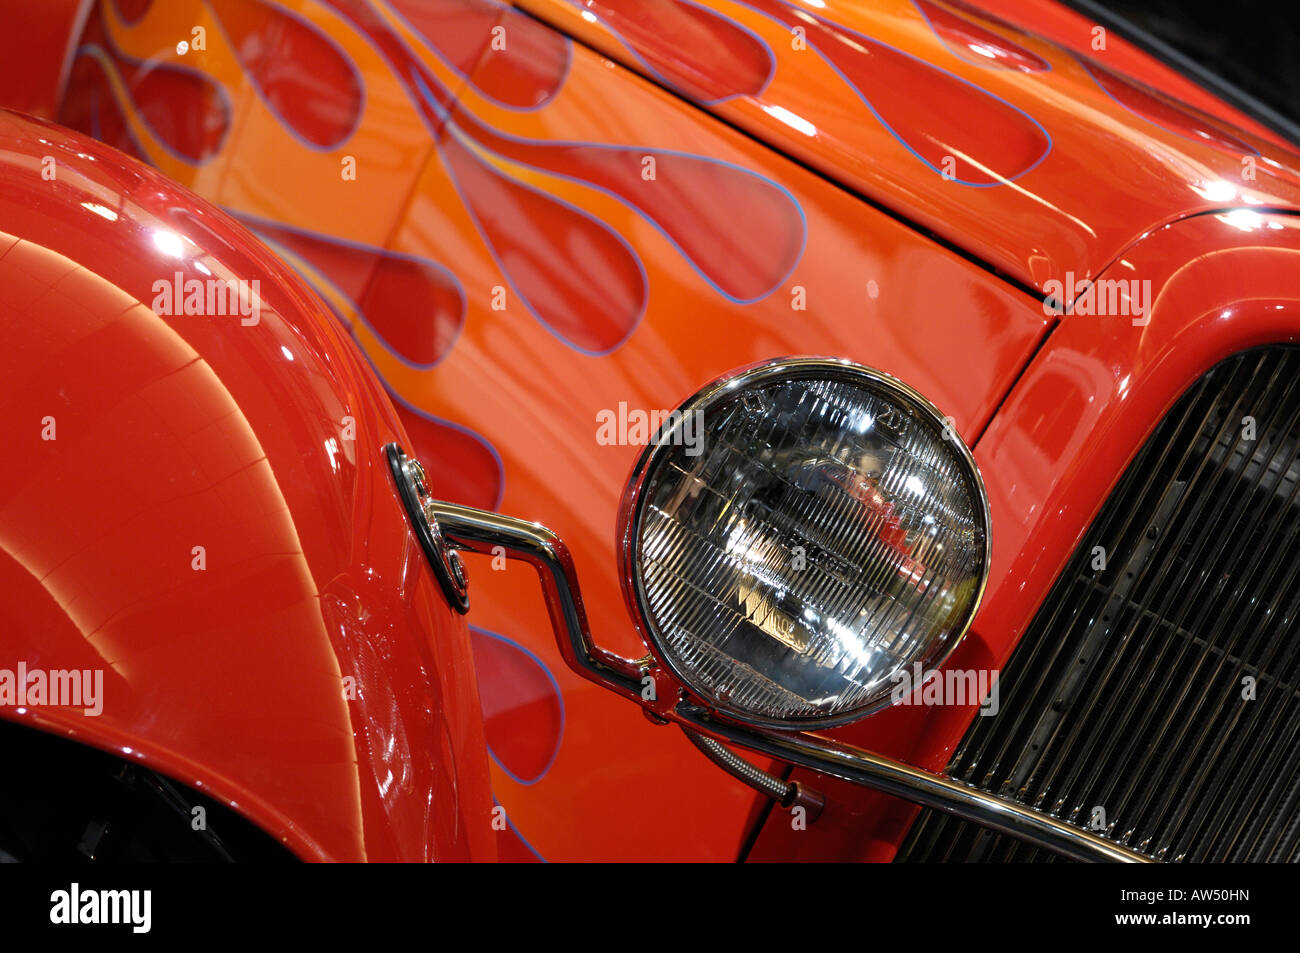 Red Hot rod Ford coupe Stock Photo